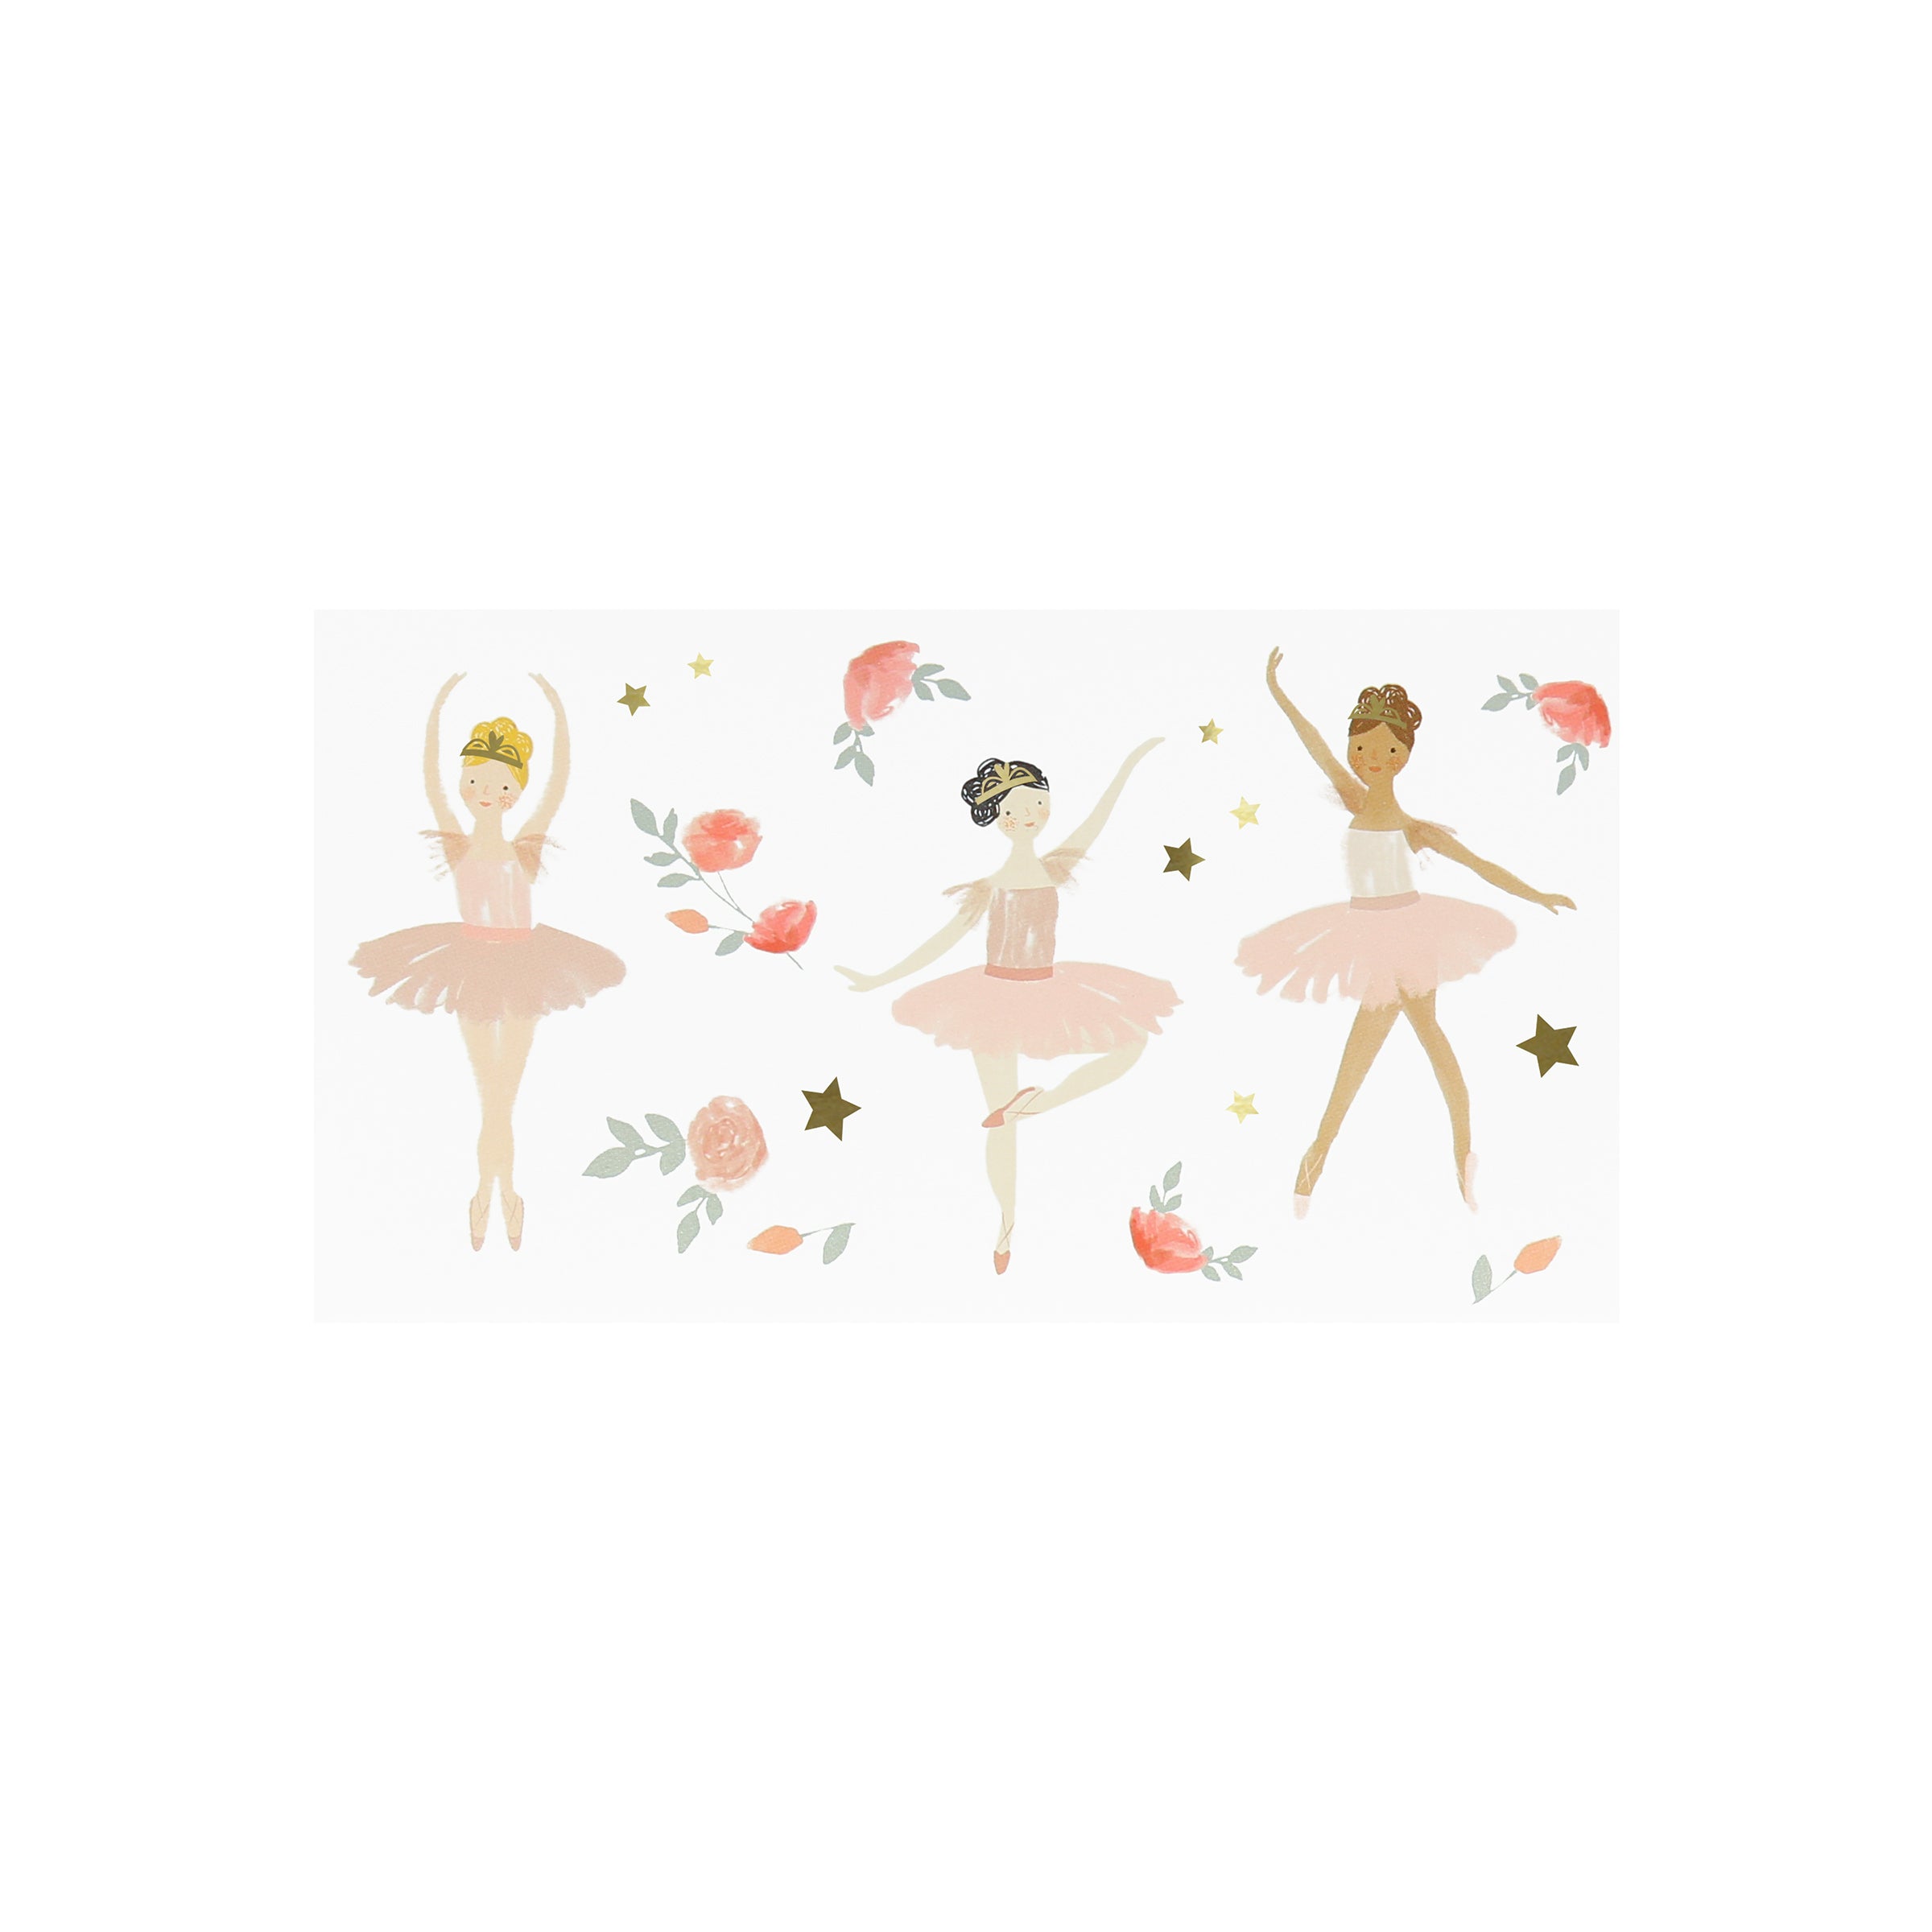 Our temporary tattoos feature ballet dancers for a fabulous decoration.